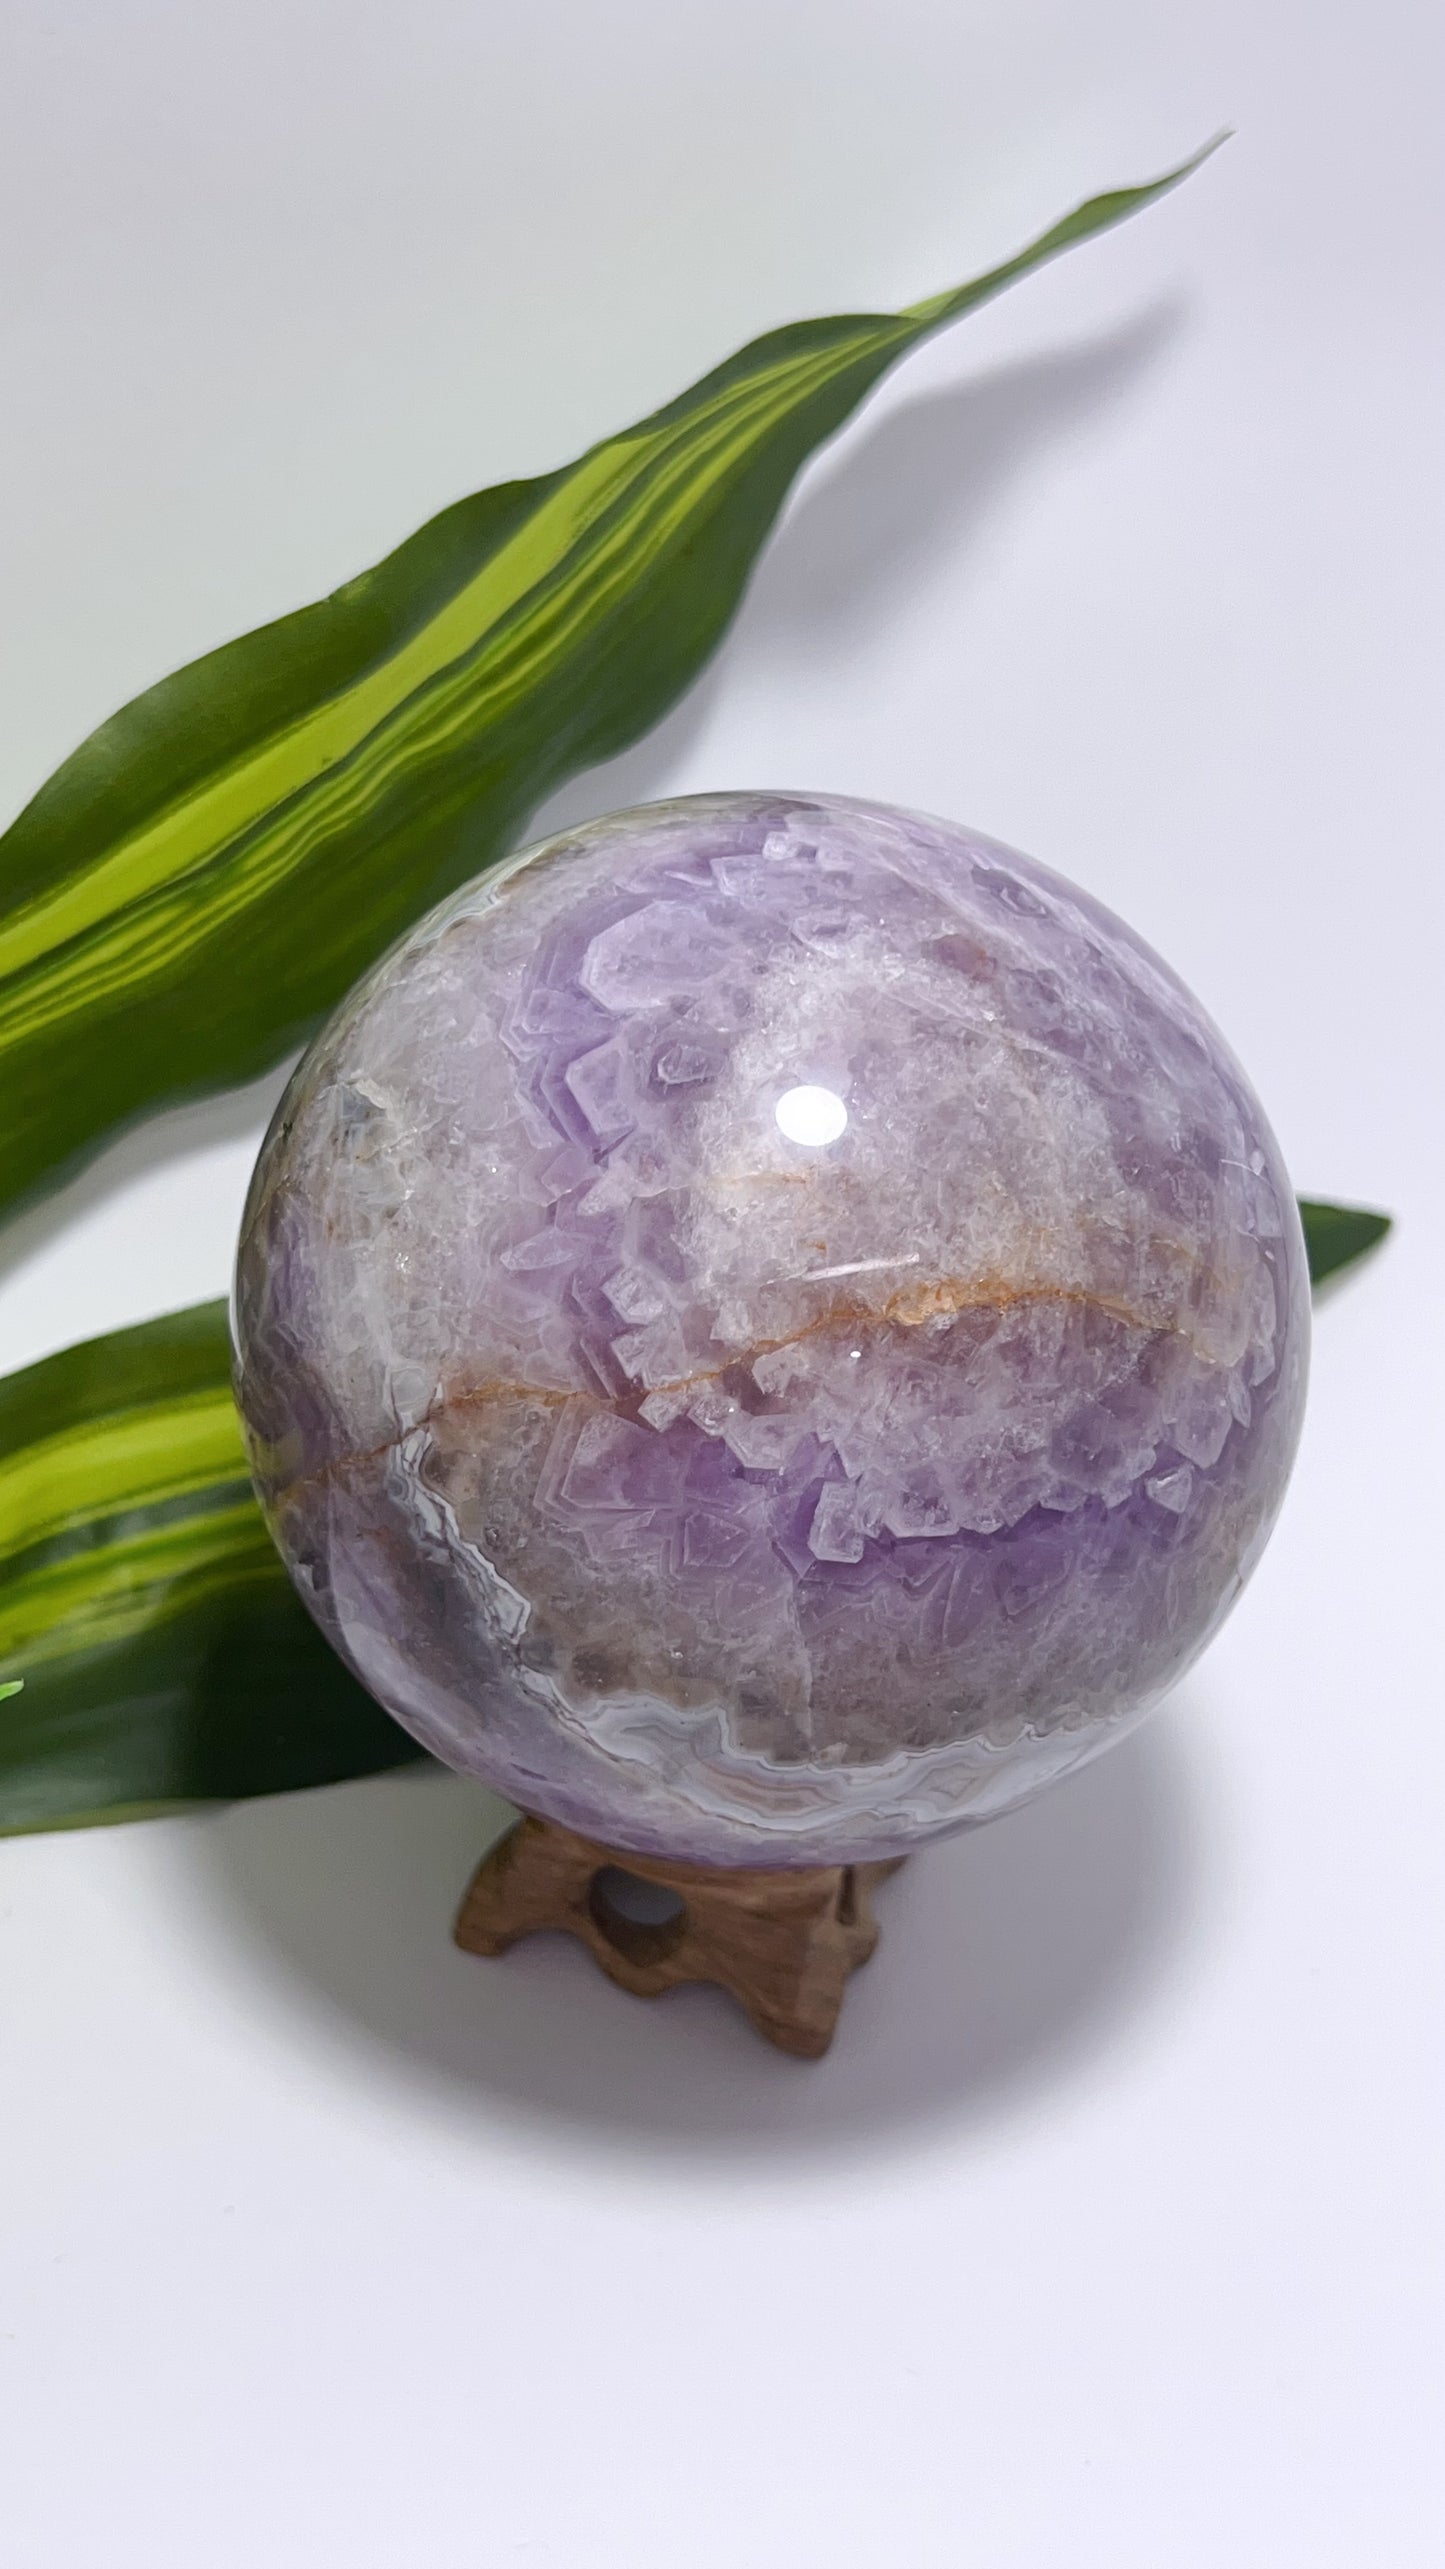 Amethyst and Mexican Agate Sphere 1318g